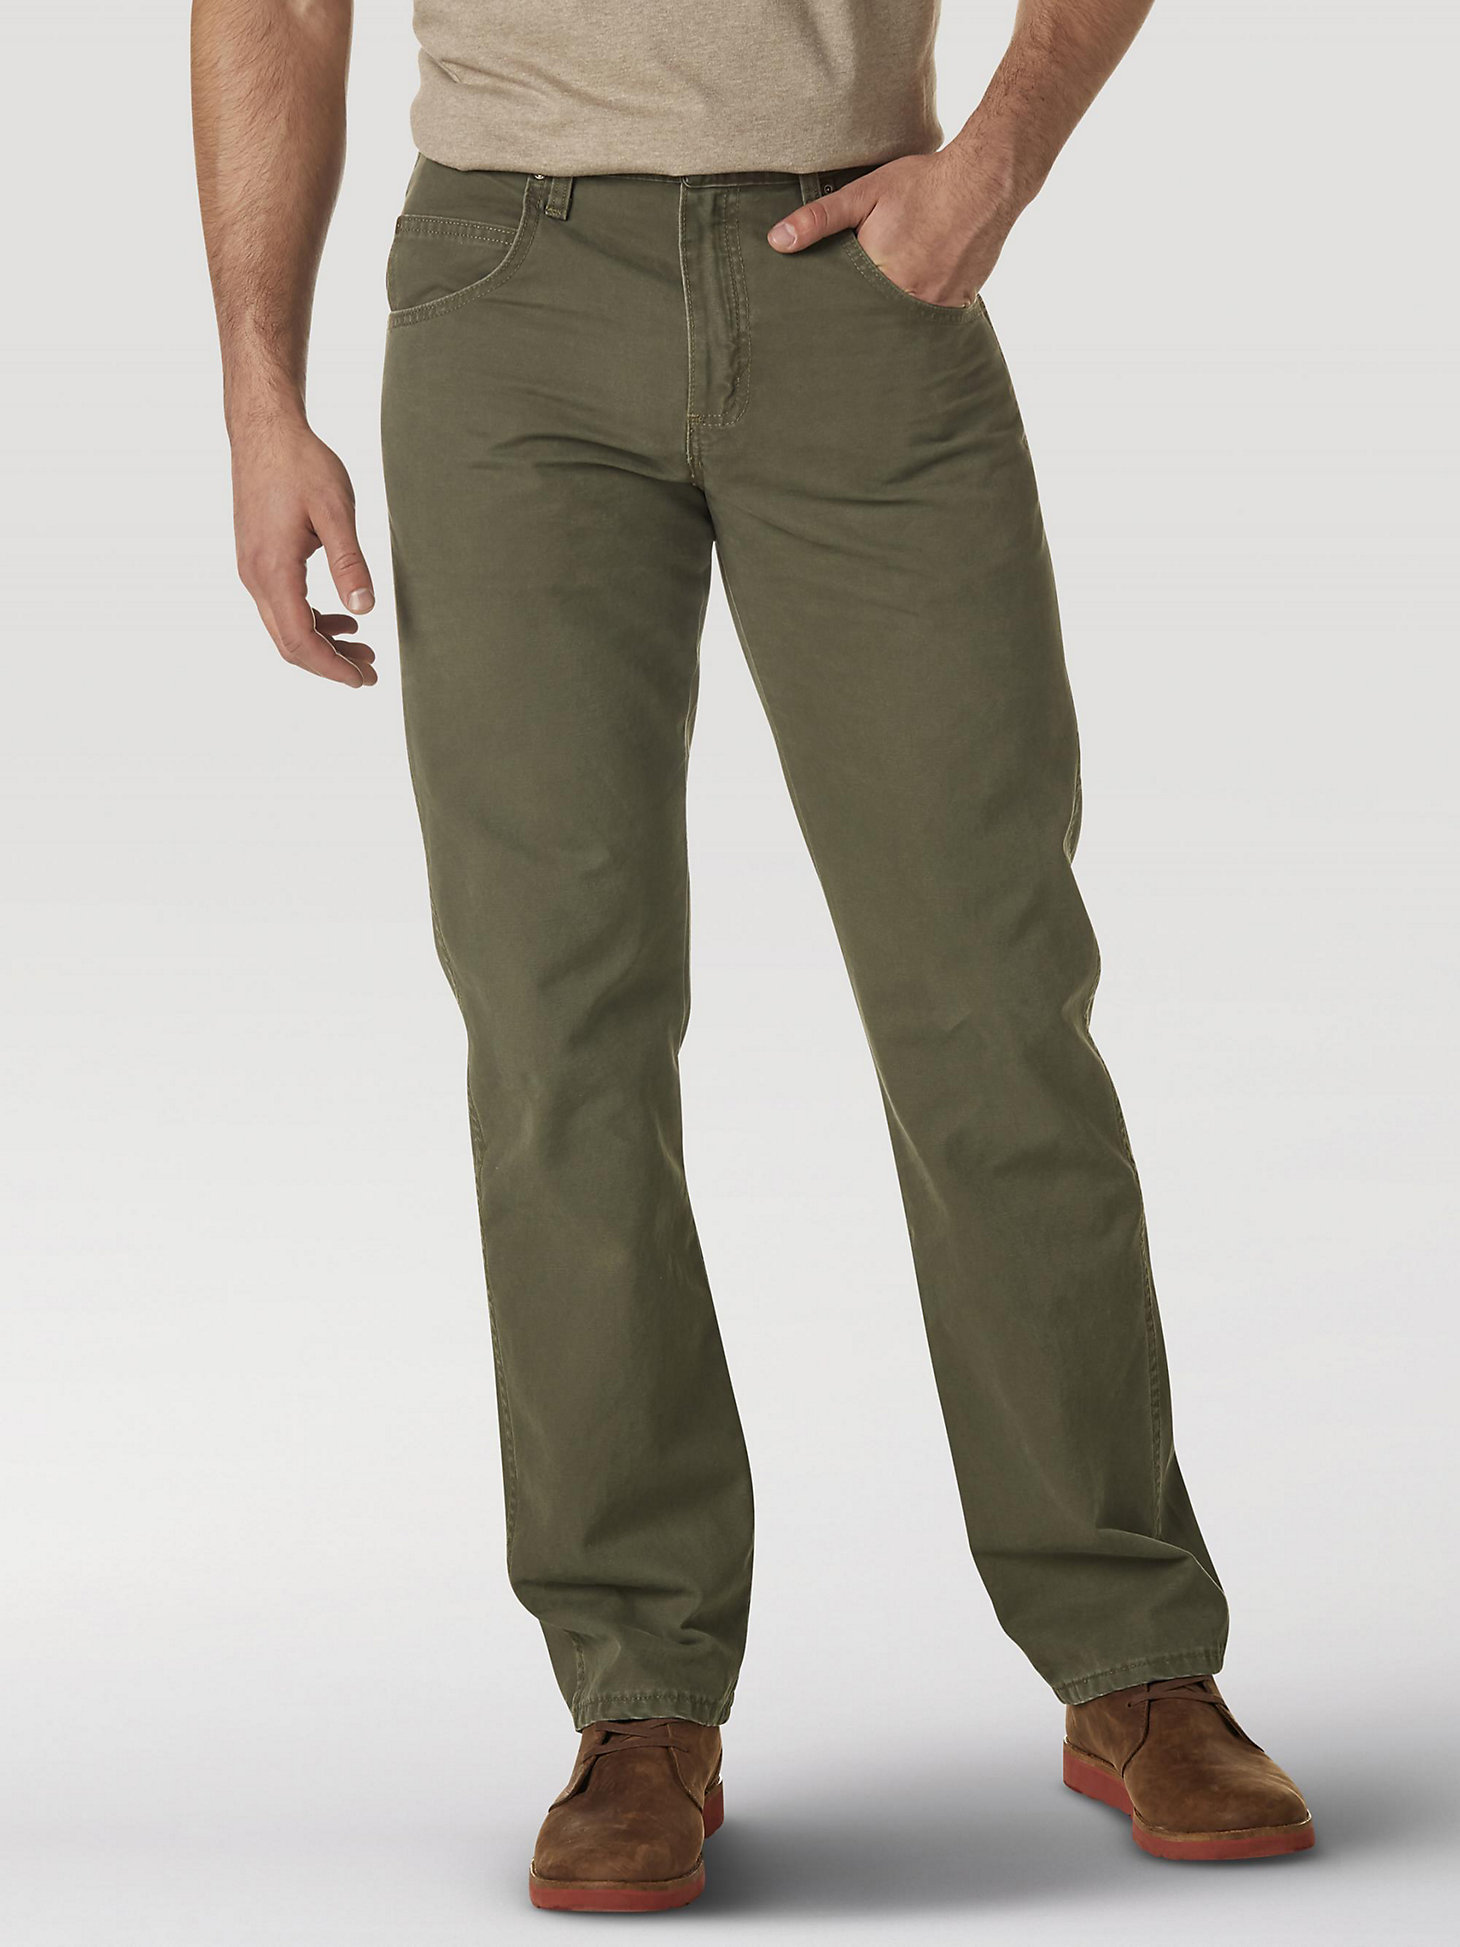 Wrangler Rugged Wear® Regular Fit Straight Leg Canvas Pant in Moss main view